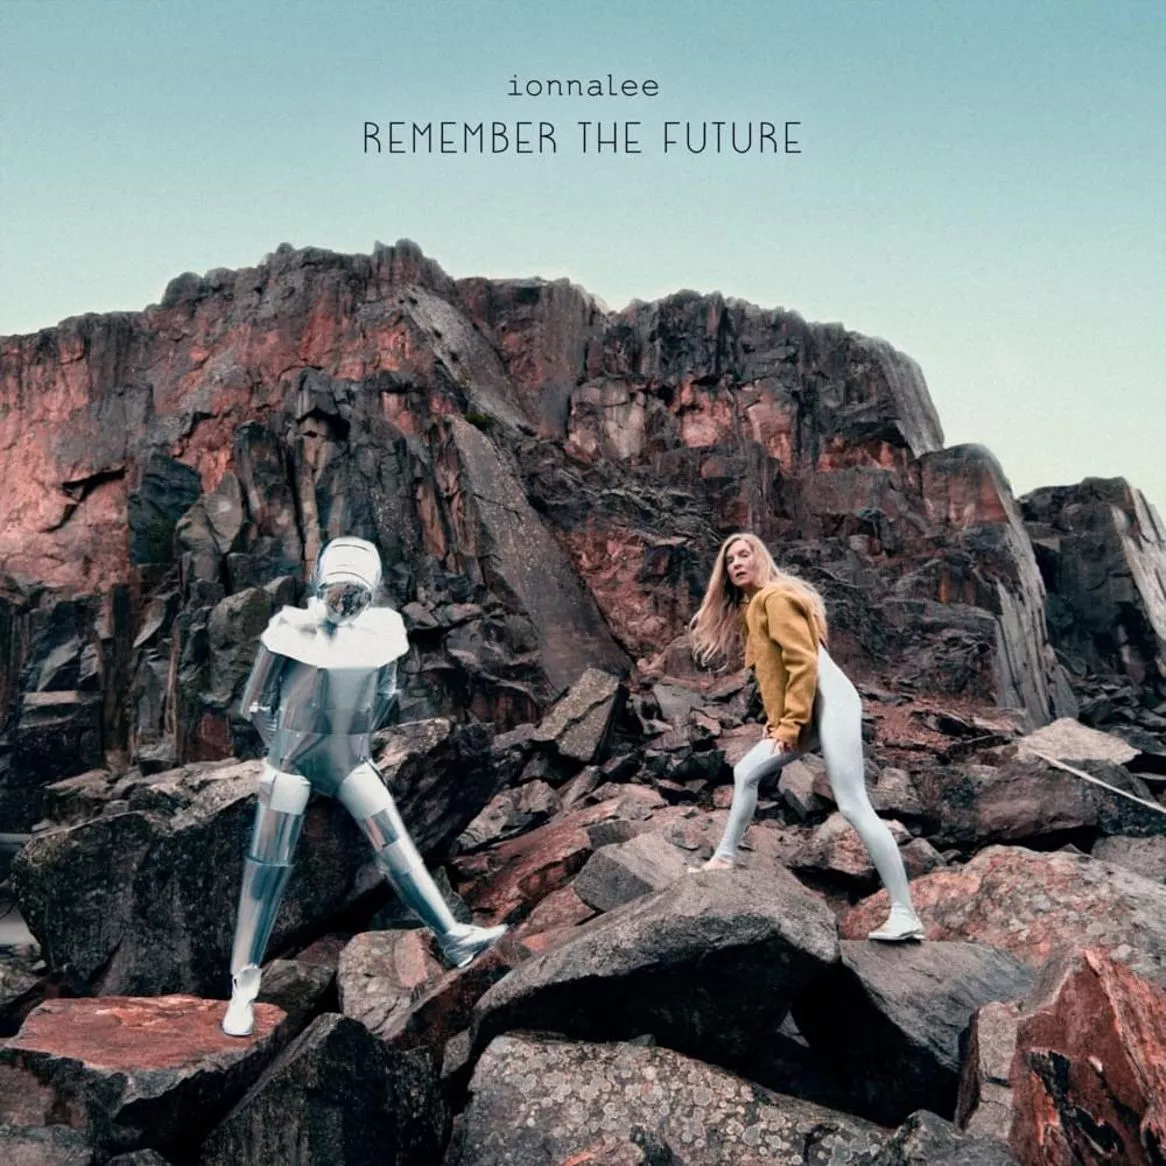 REMEMBER THE FUTURE - ionnalee